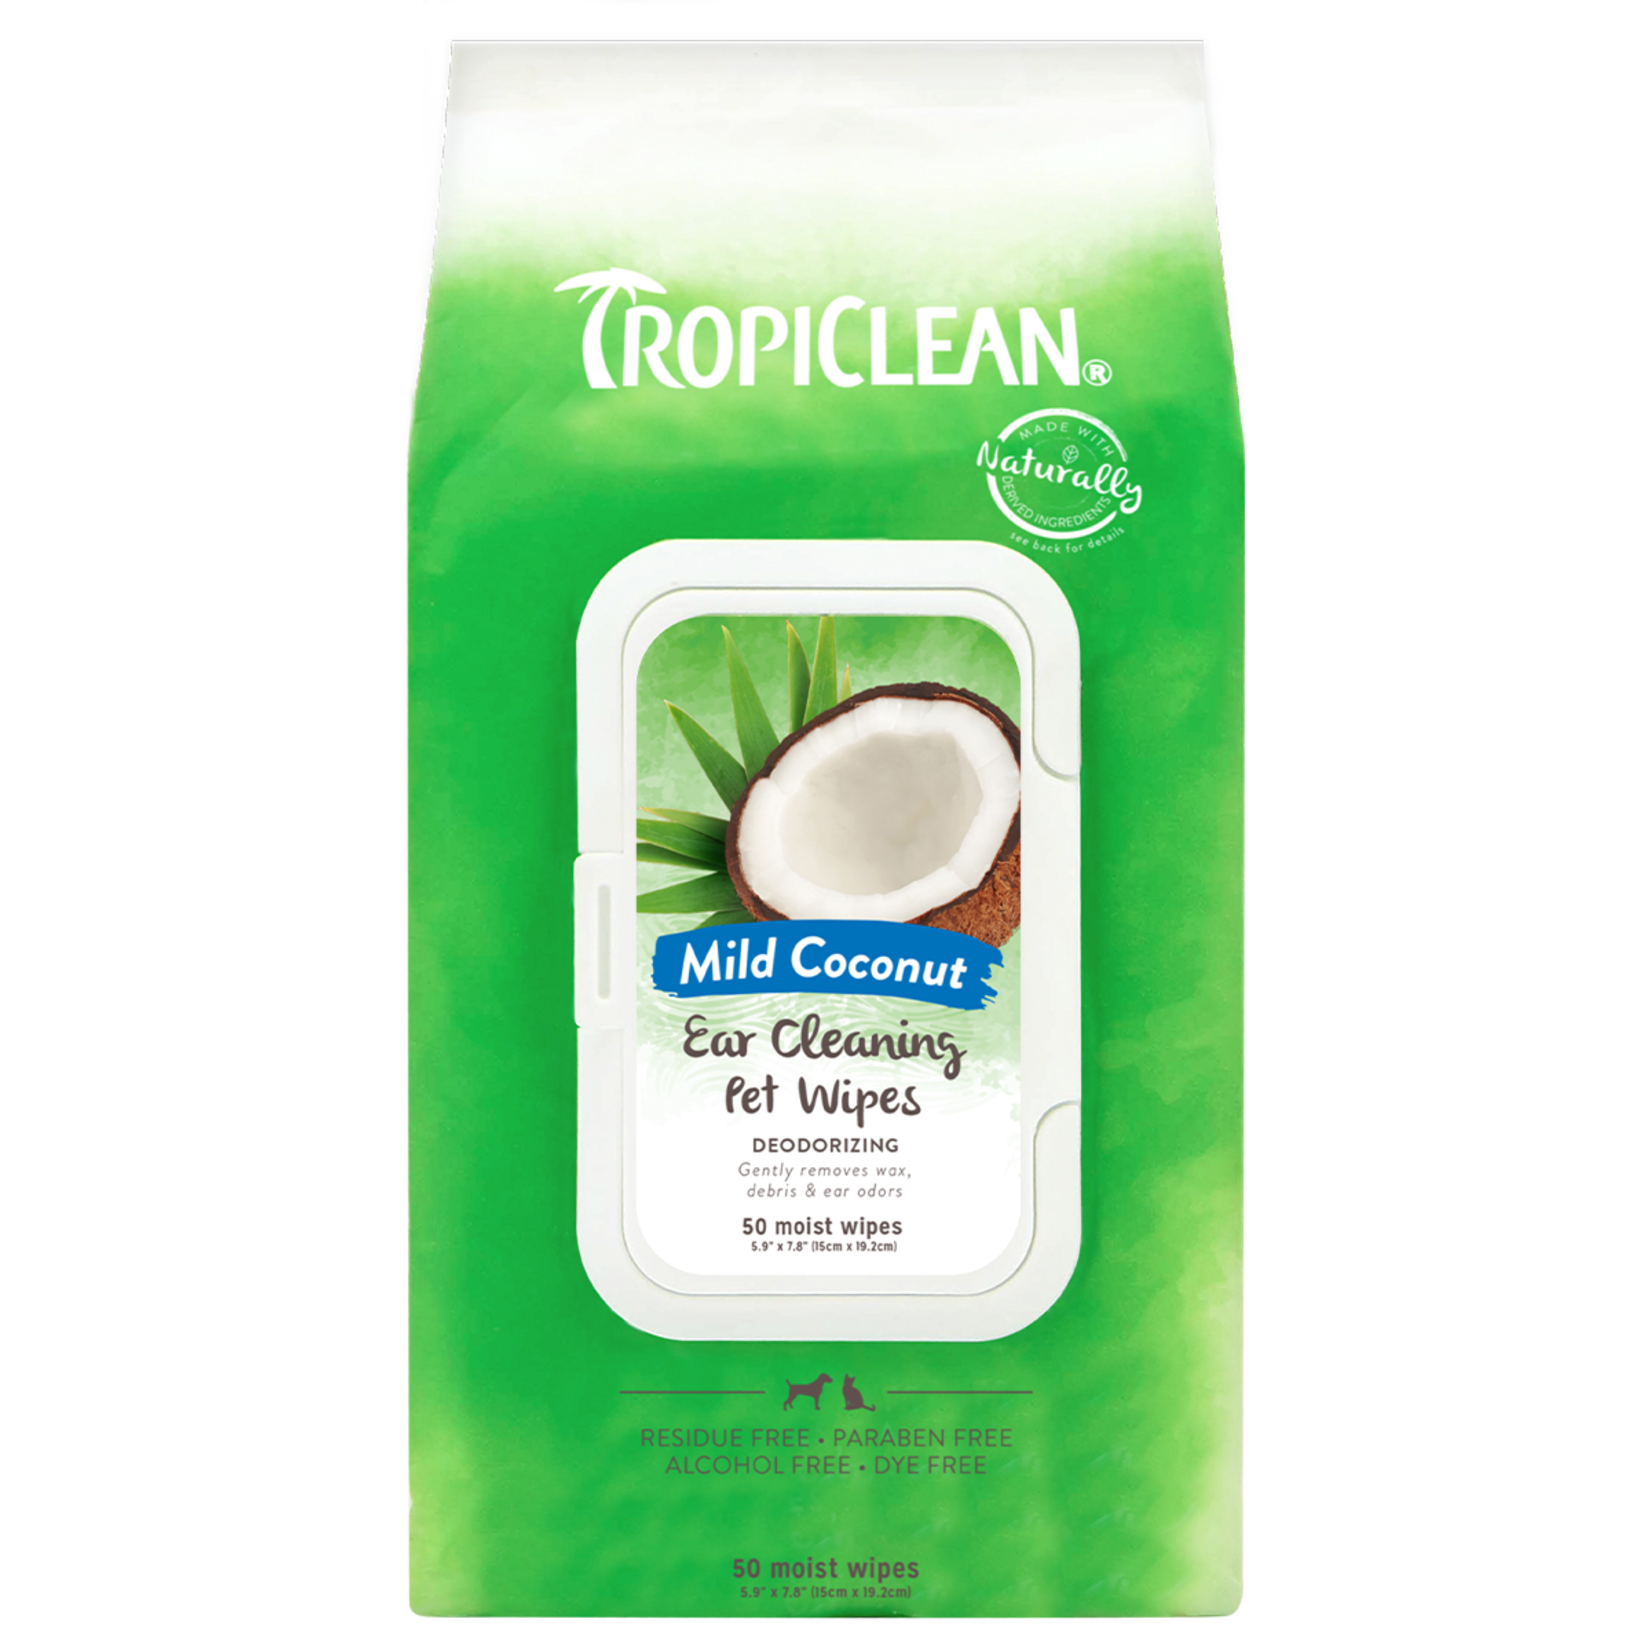 TropiClean Ear Cleaning Wipes, 50 wipes